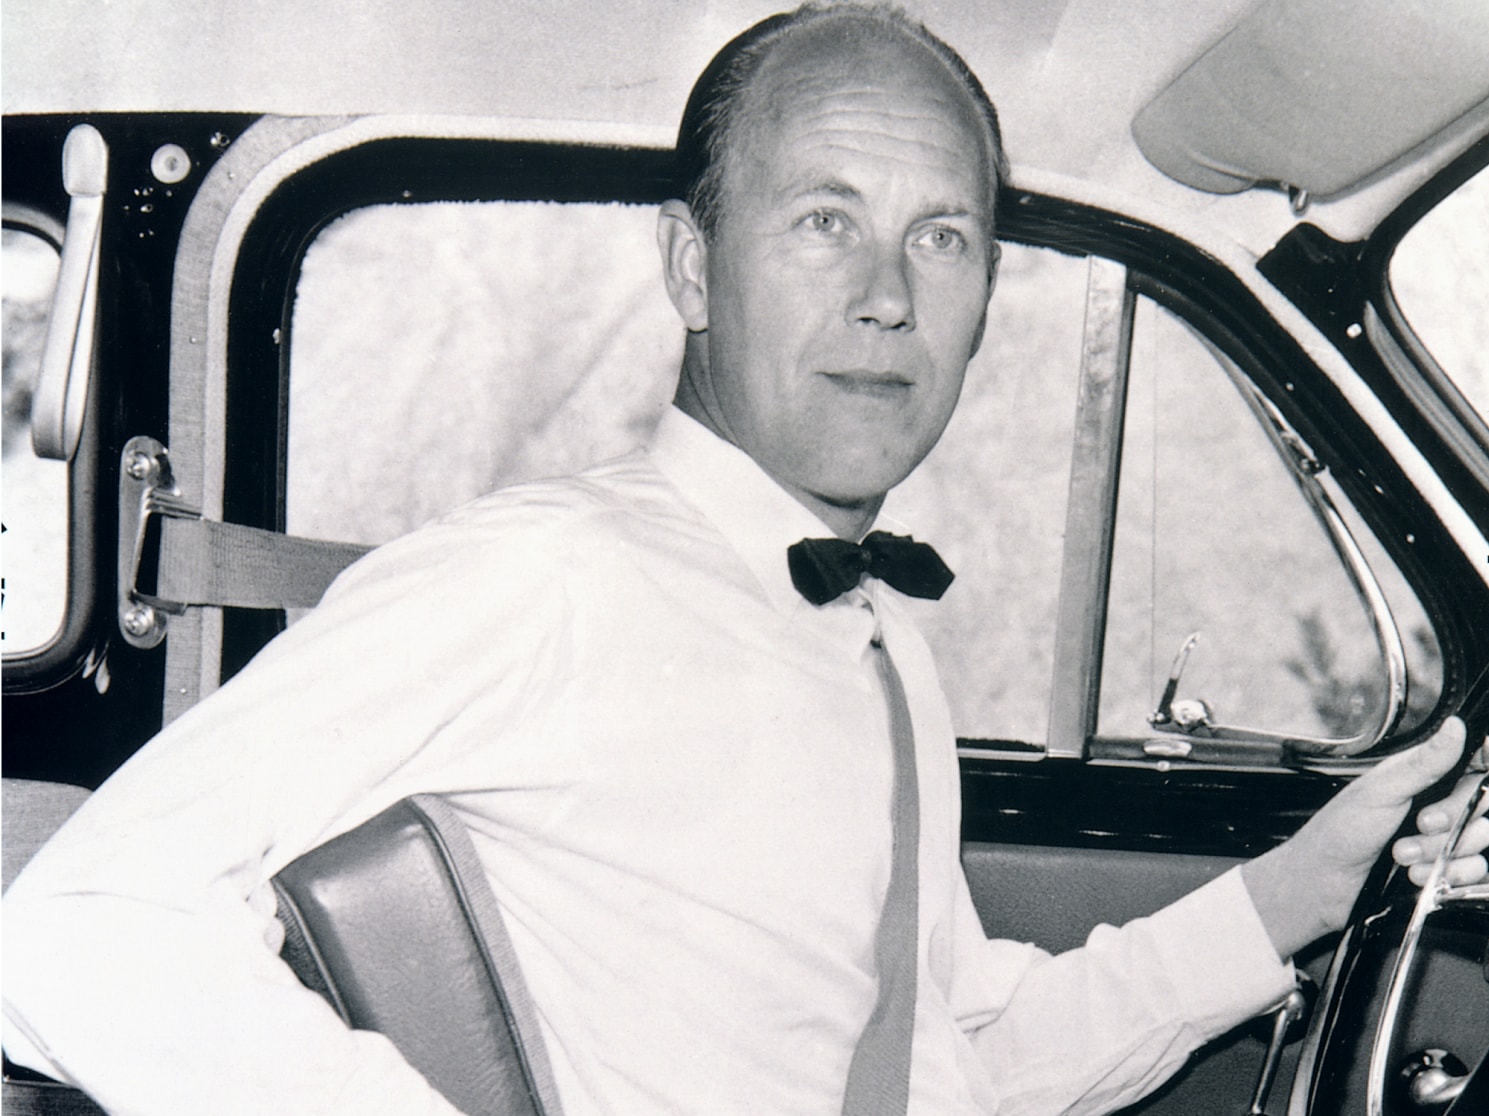 The three-point safety belt showcased by the inventor, Nils Bohlin in 1959.